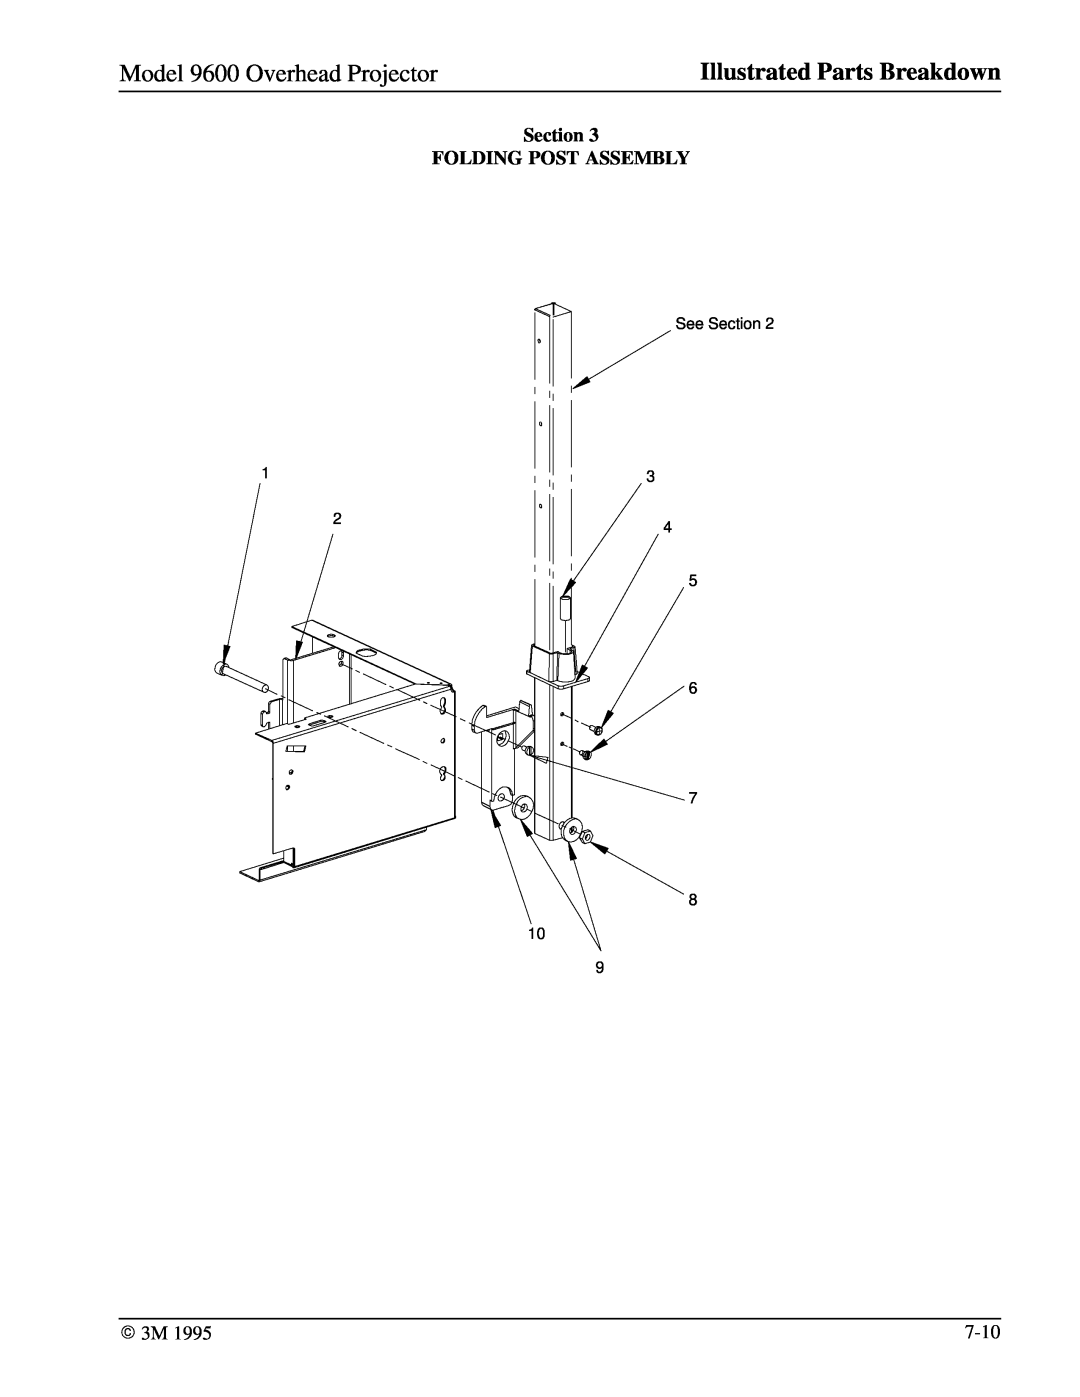 3M manual Section FOLDING POST ASSEMBLY, Model 9600 Overhead Projector, Illustrated Parts Breakdown 